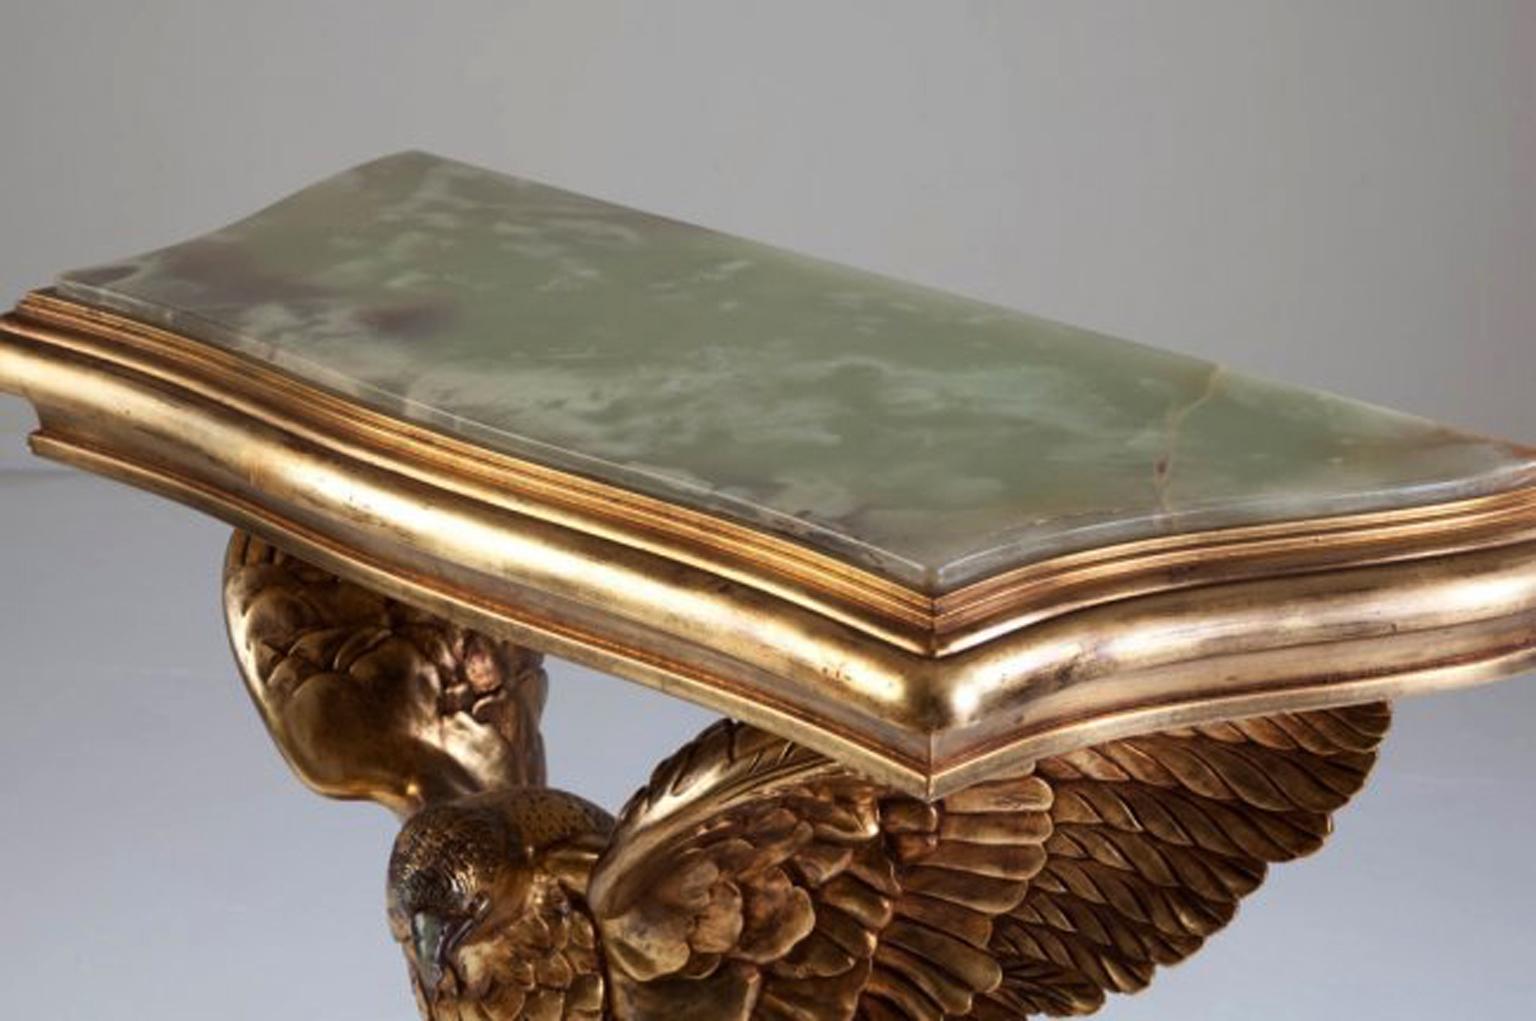 Carved English Giltwood and Onyx Console Table